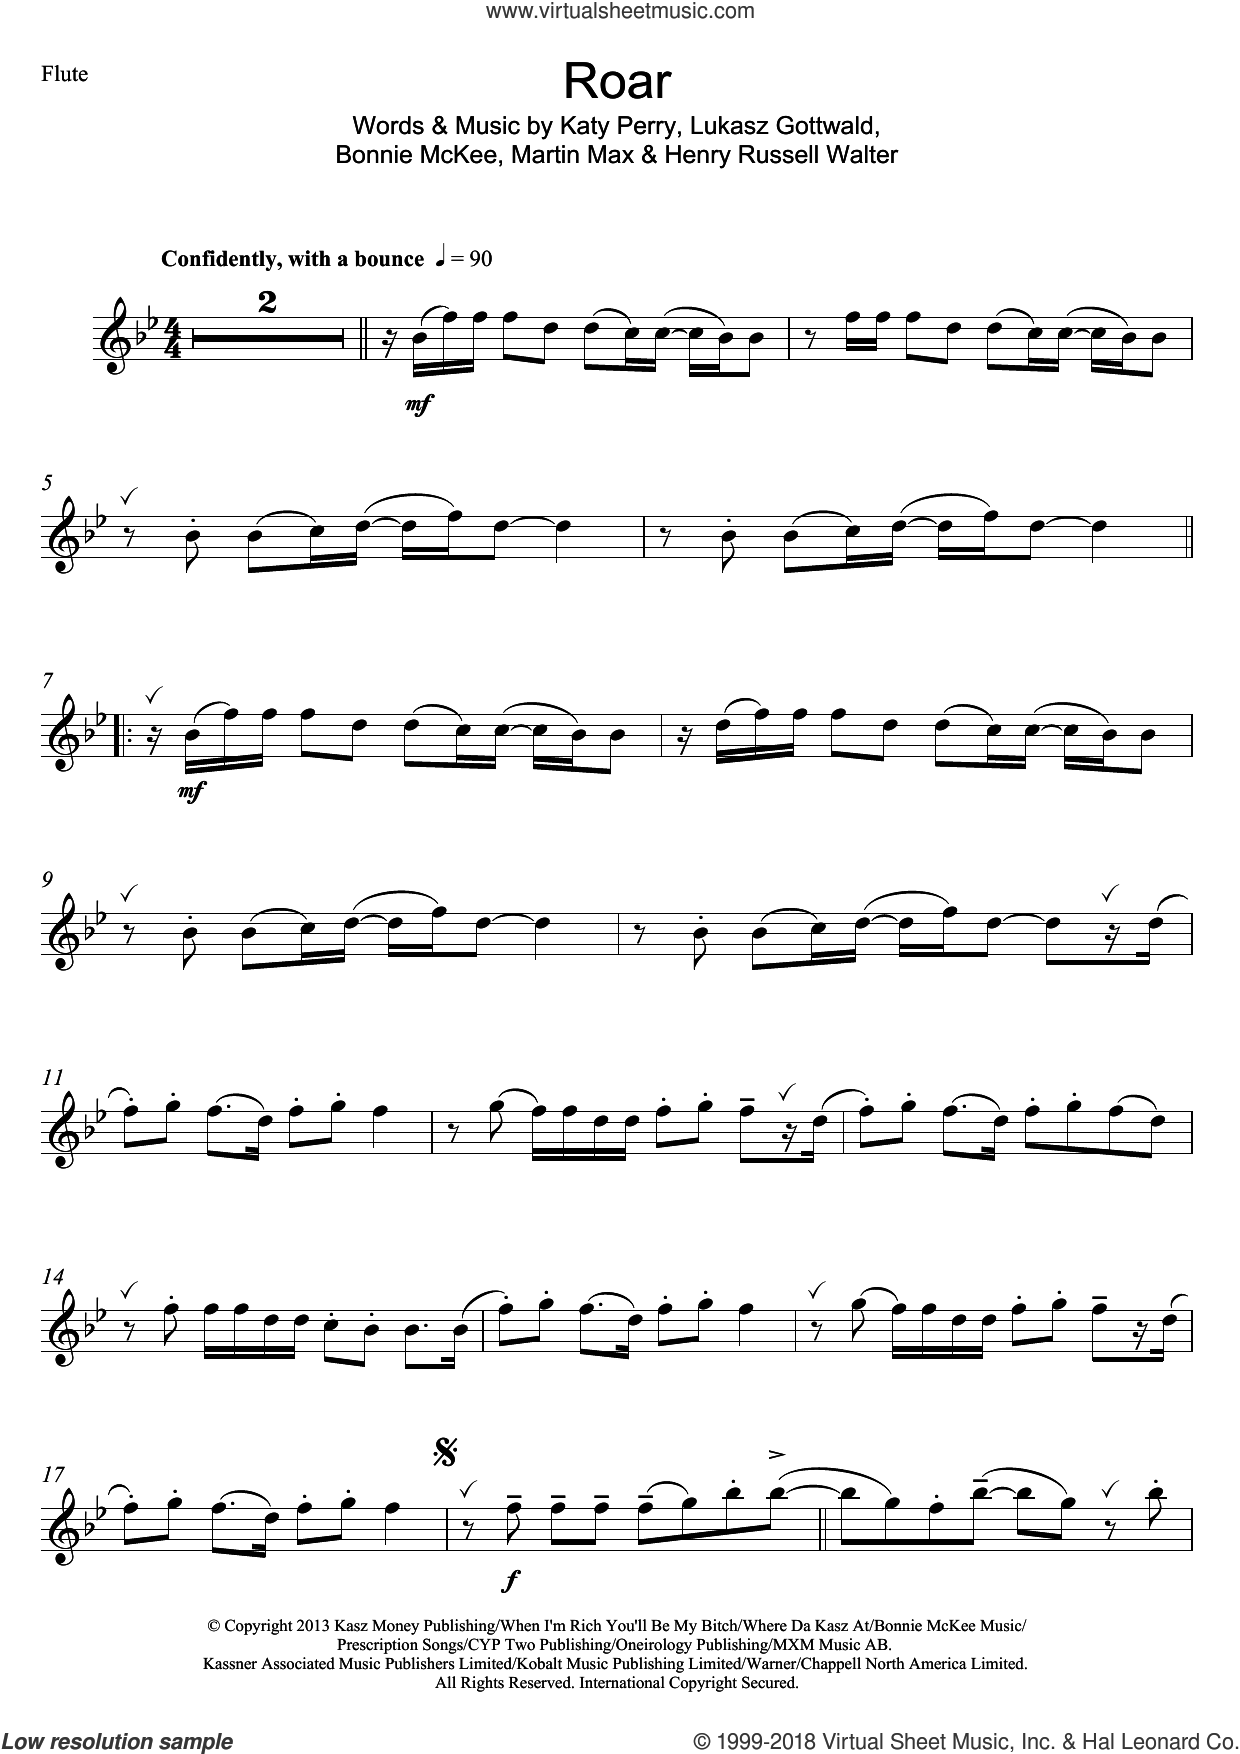 Perry - Roar sheet music for flute solo (PDF-interactive)